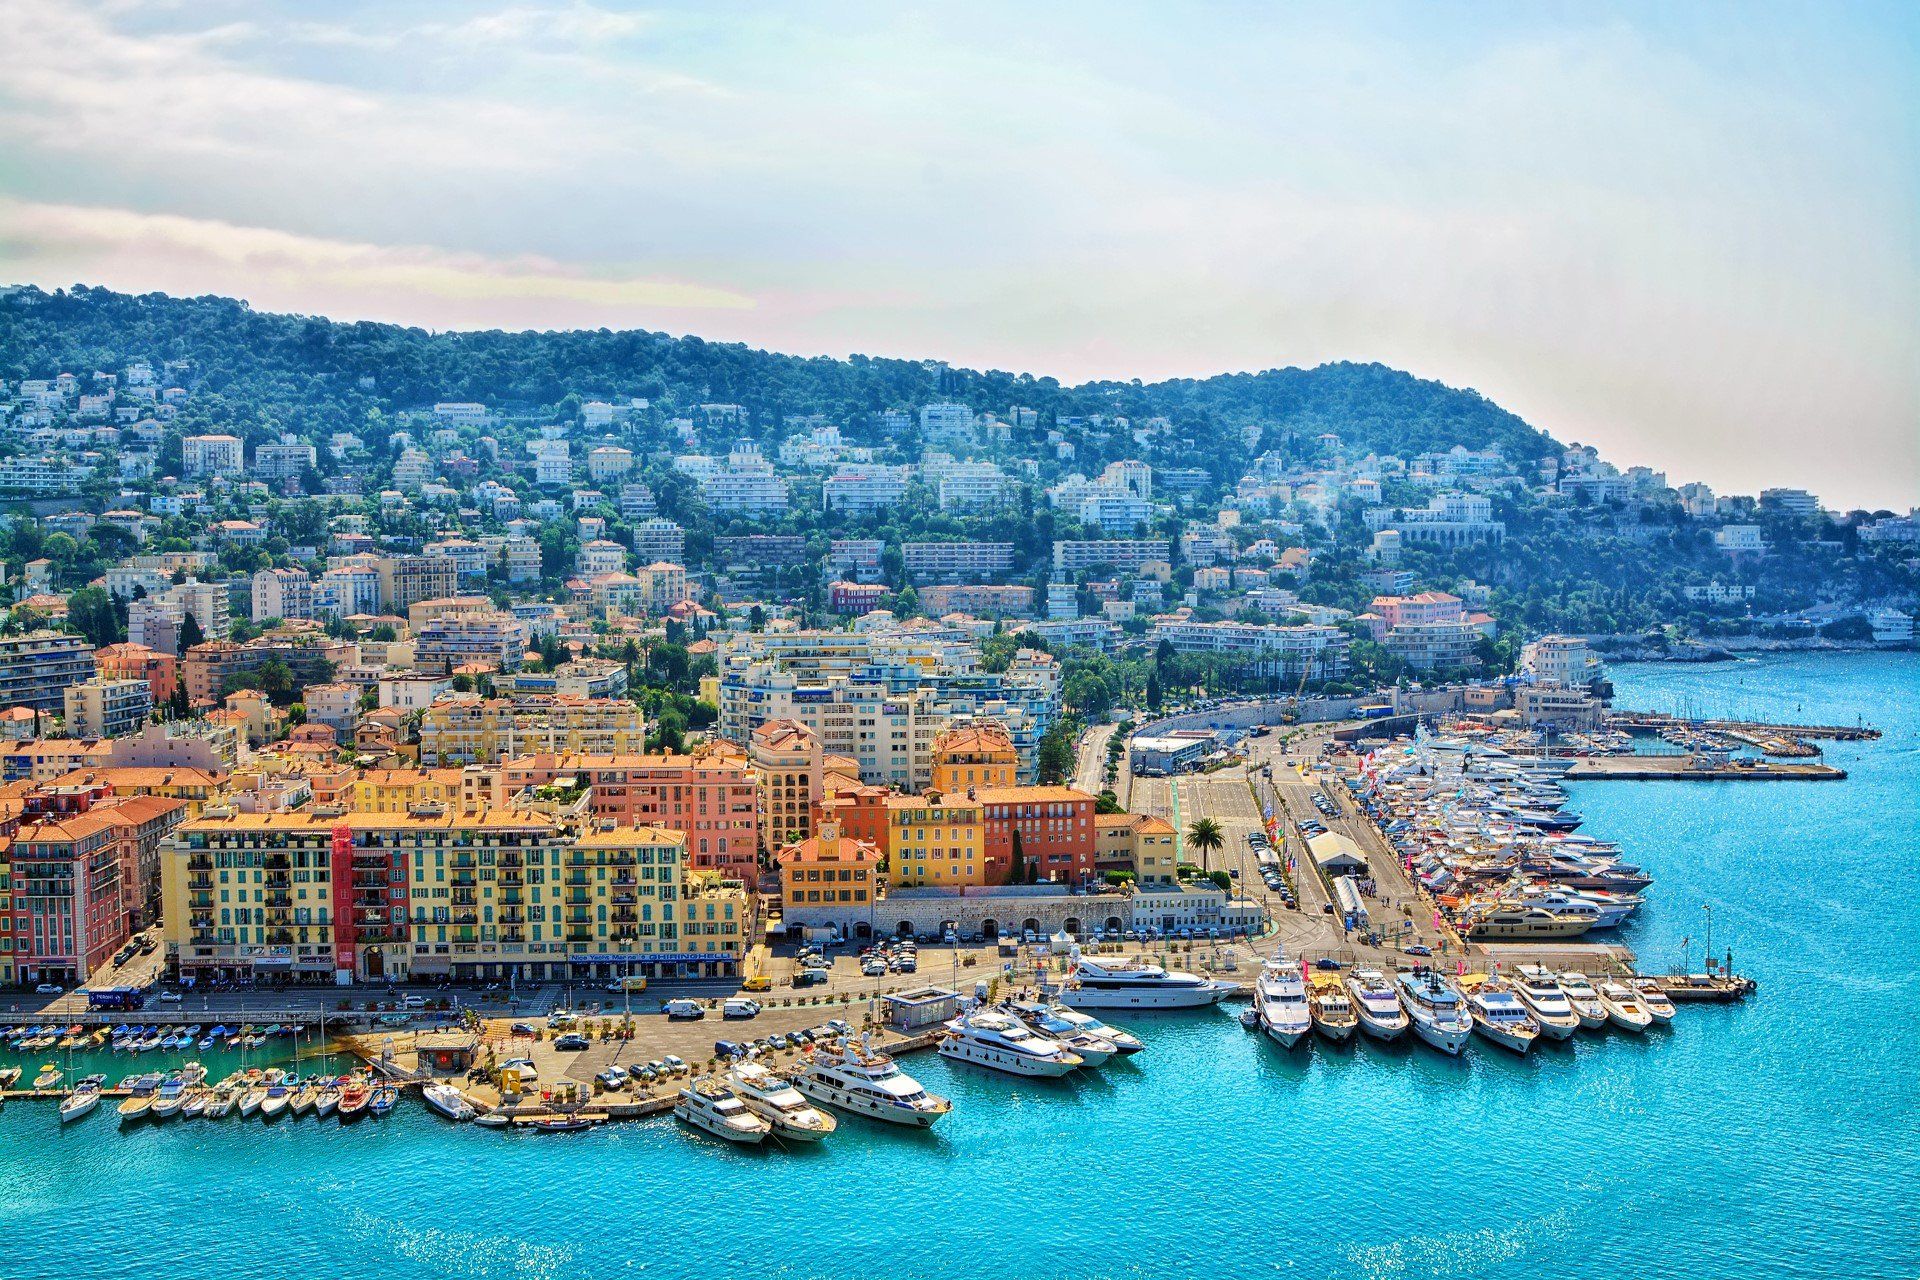 Holiday in the Cote d'Azur for its sandy beaches, year-round sunshine and world-class shopping and gastronomy